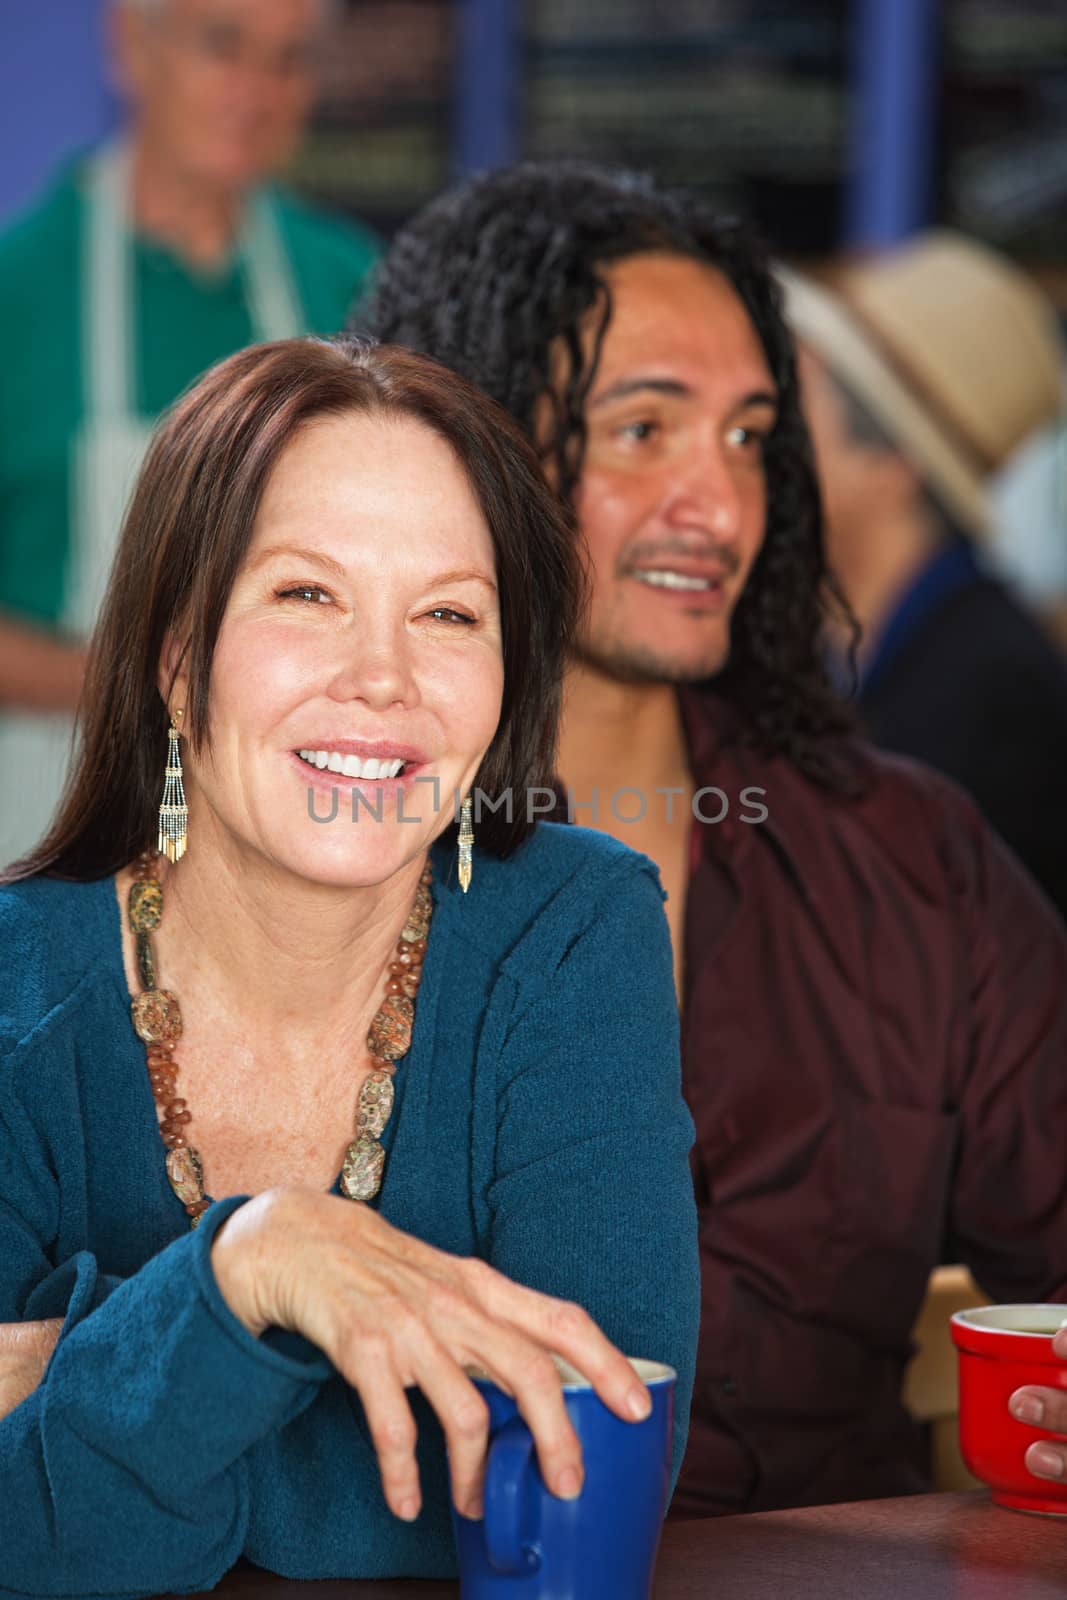 Smiling Woman with Man in Cafe by Creatista